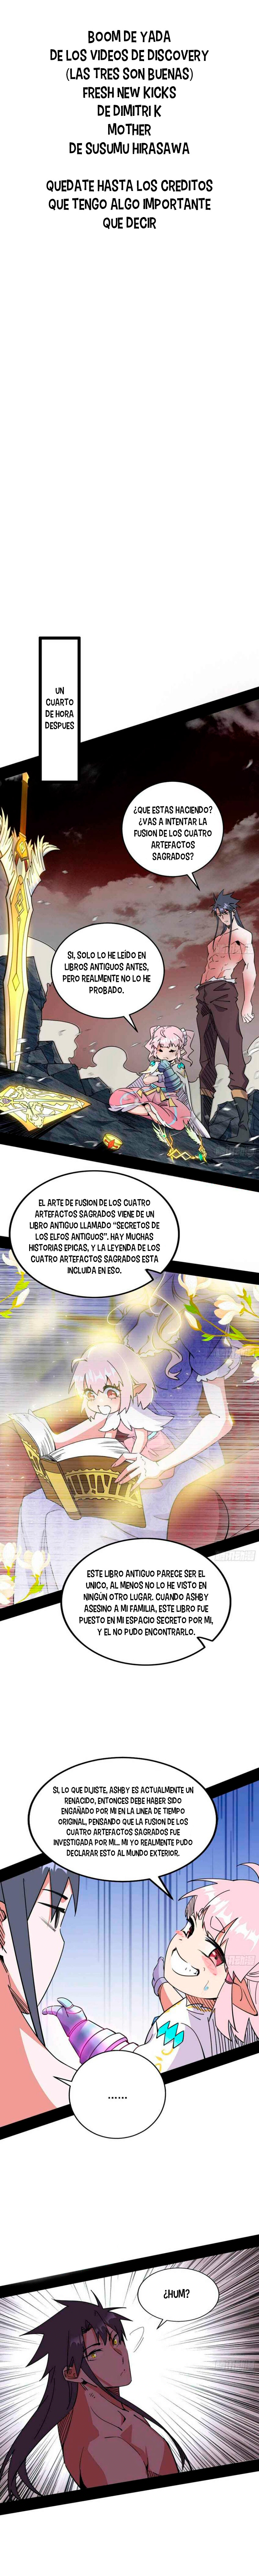 Manga Soy un dios maligno Chapter 258 image number 8